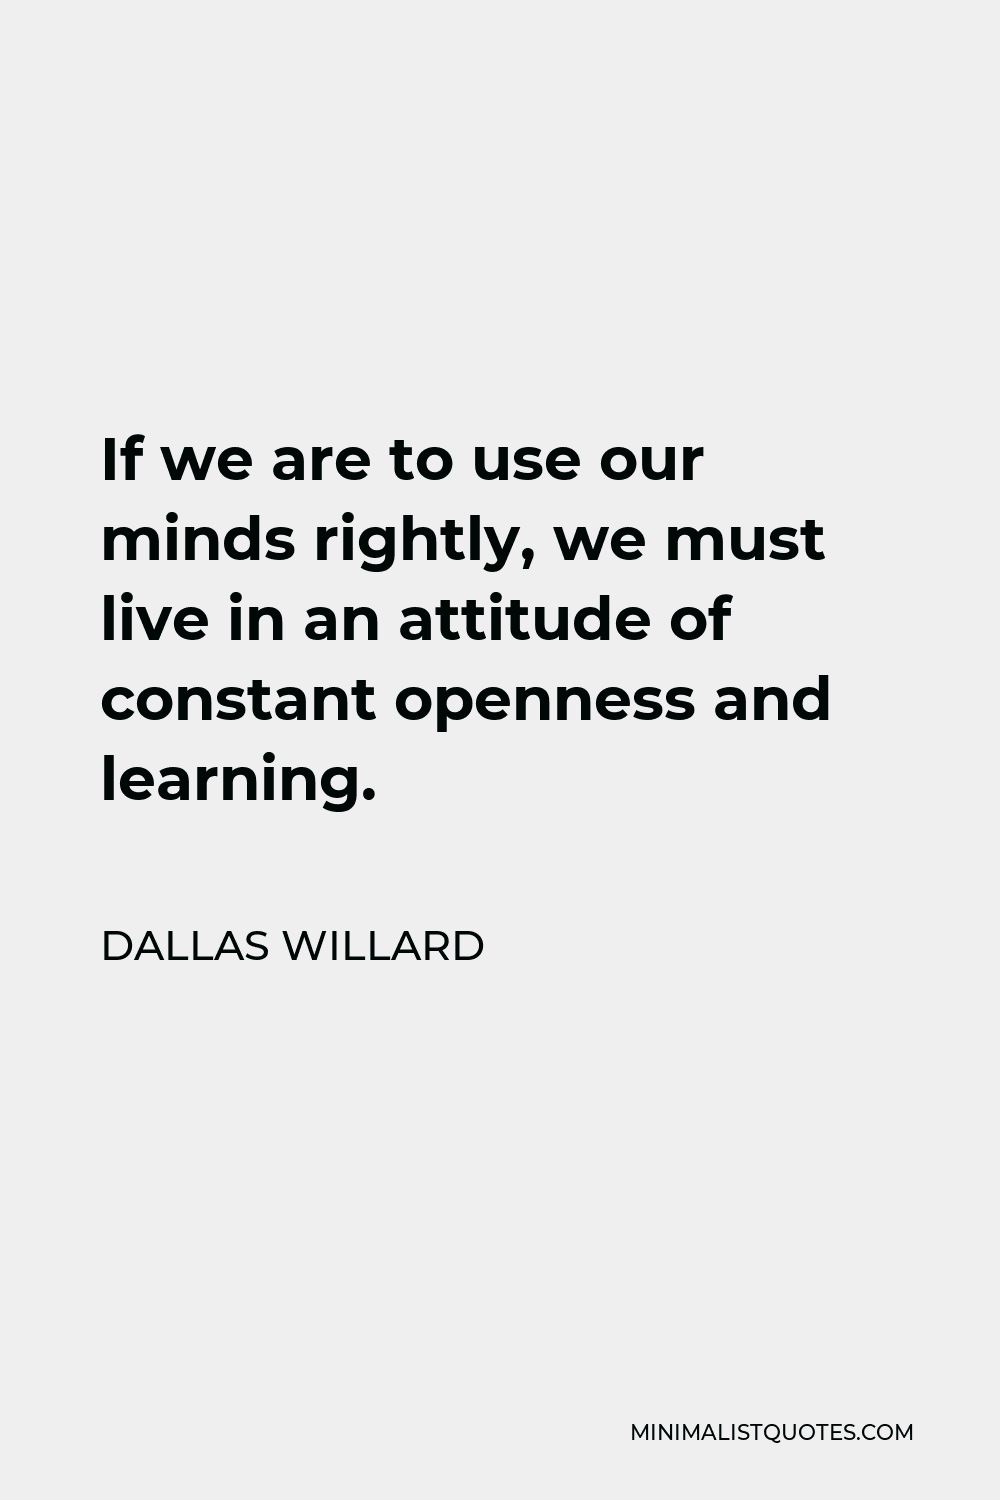 Dallas Willard Quote - If we are to use our minds rightly, we must live in an attitude of constant openness and learning.